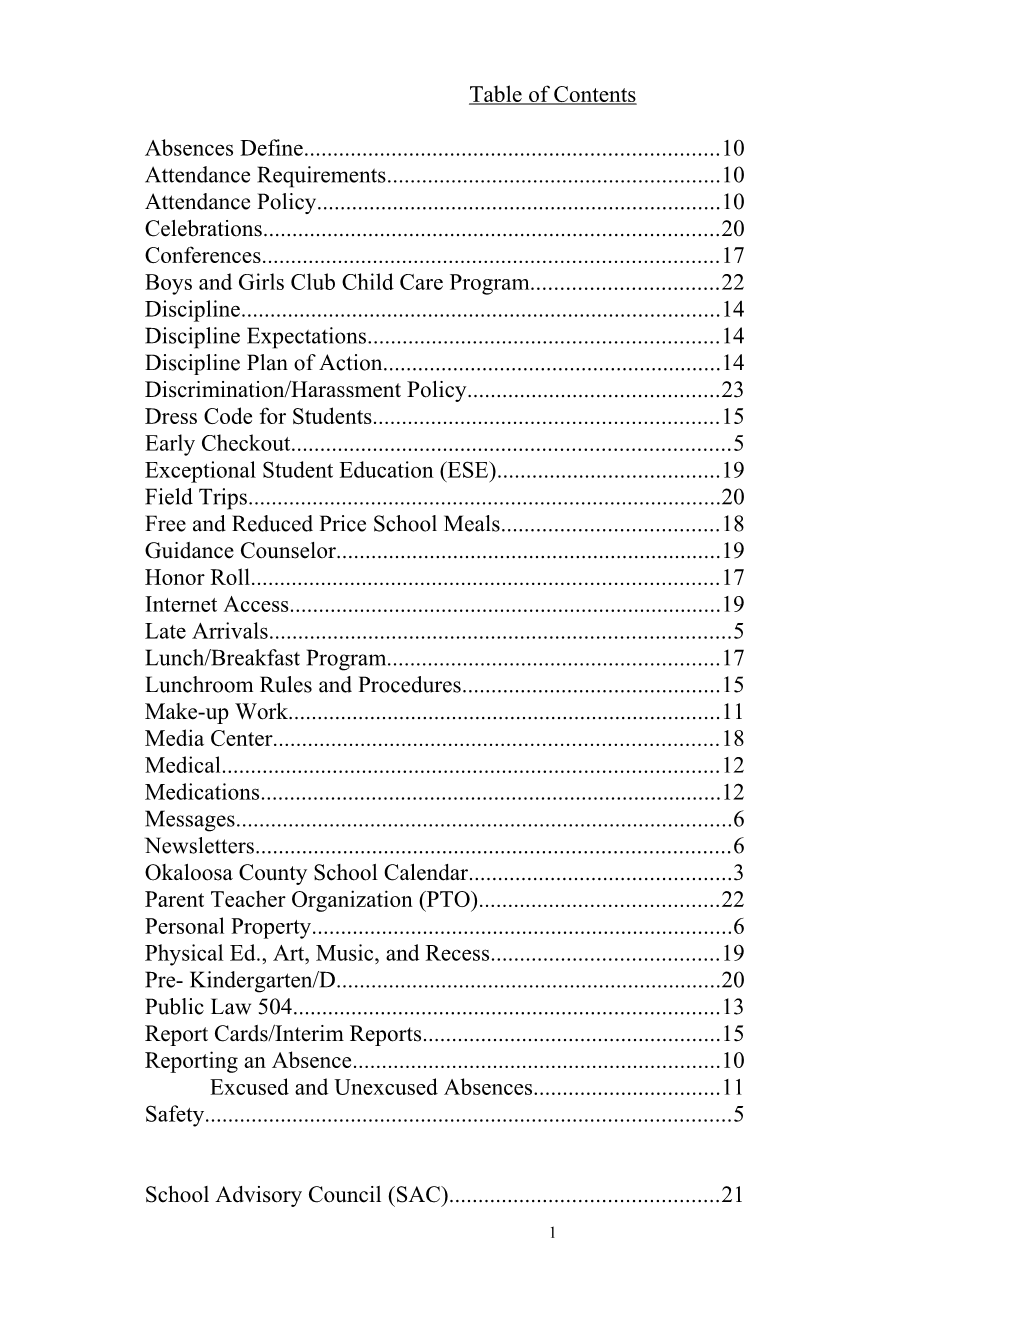 Table of Contents s267